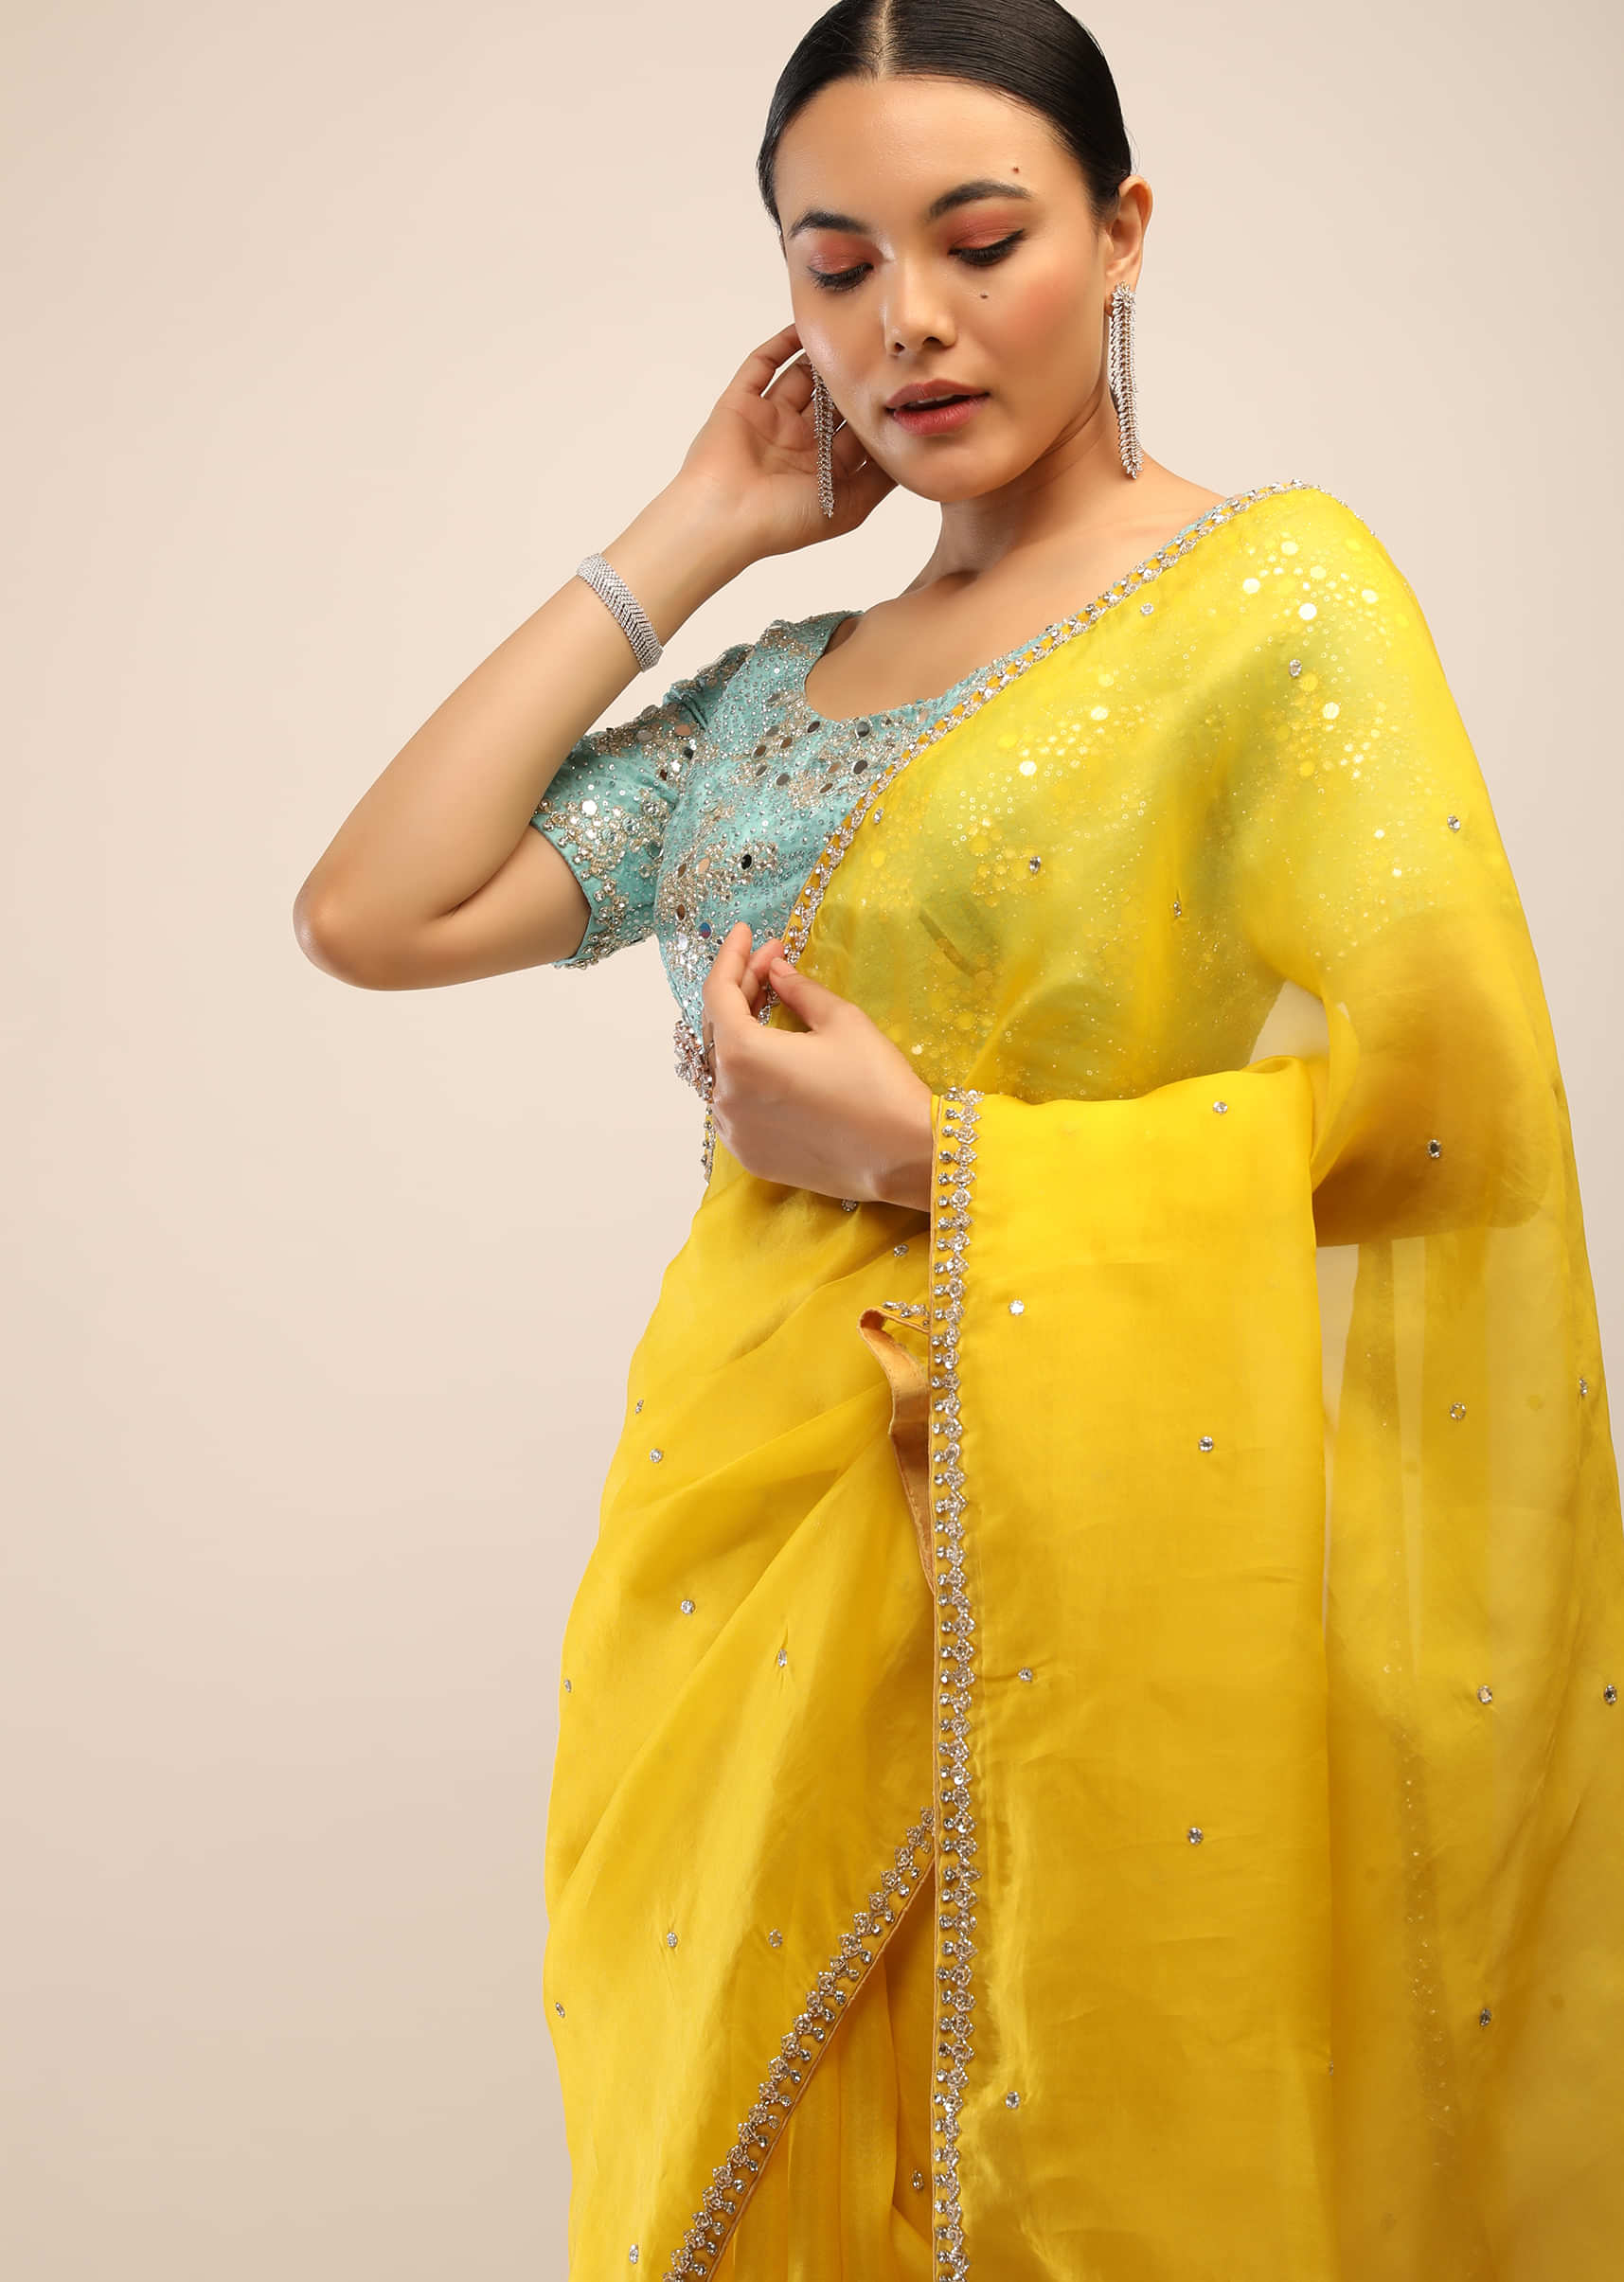 Lemon Yellow Saree In Organza With Cut Dana Border And Firozi Mirror Embroidered Unstitched Blouse